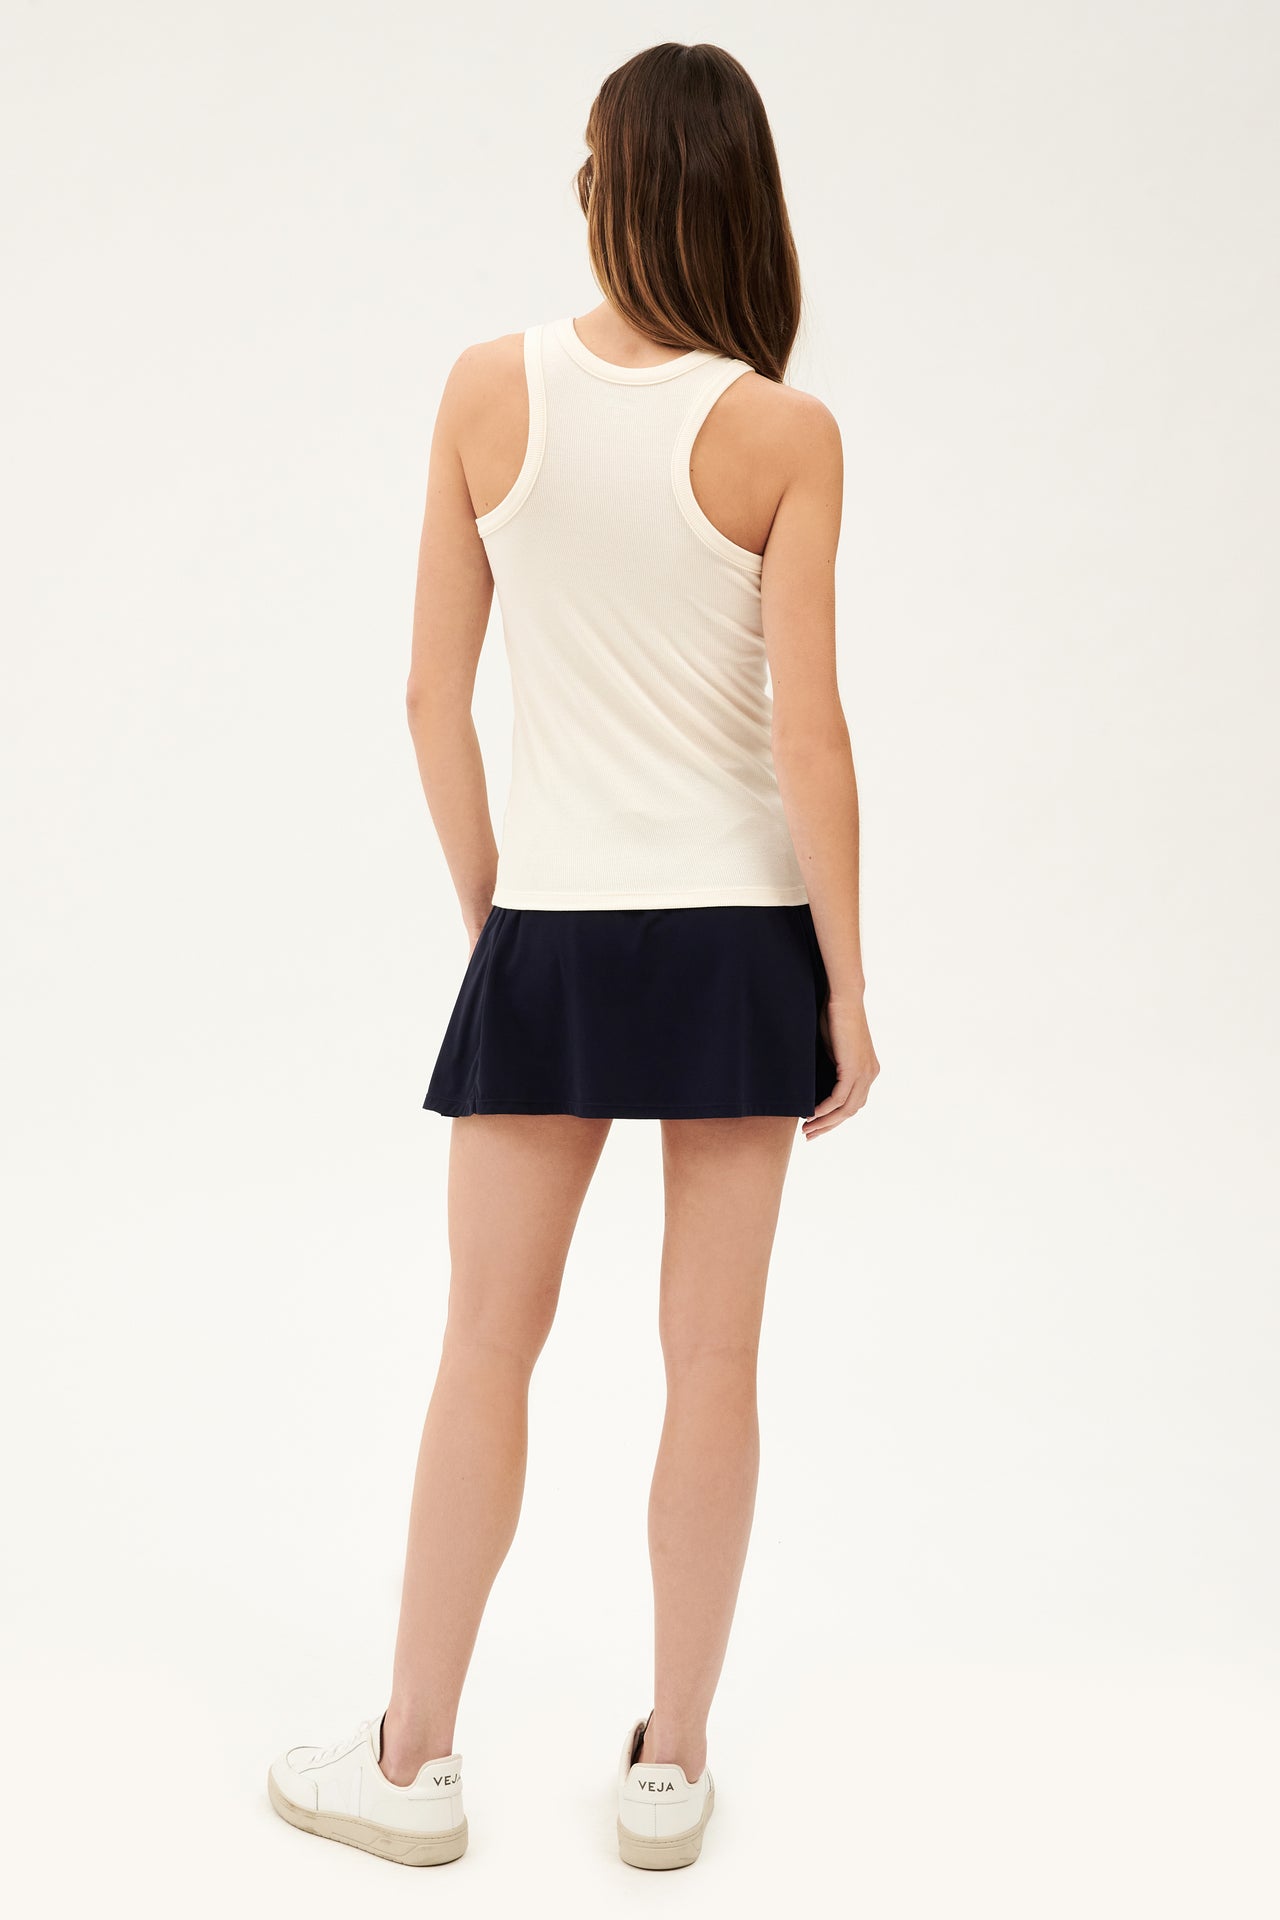 The back view of a woman wearing a SPLITS59 Kiki Rib Tank Full Length in Creme and navy skirt, ready for gym workouts.